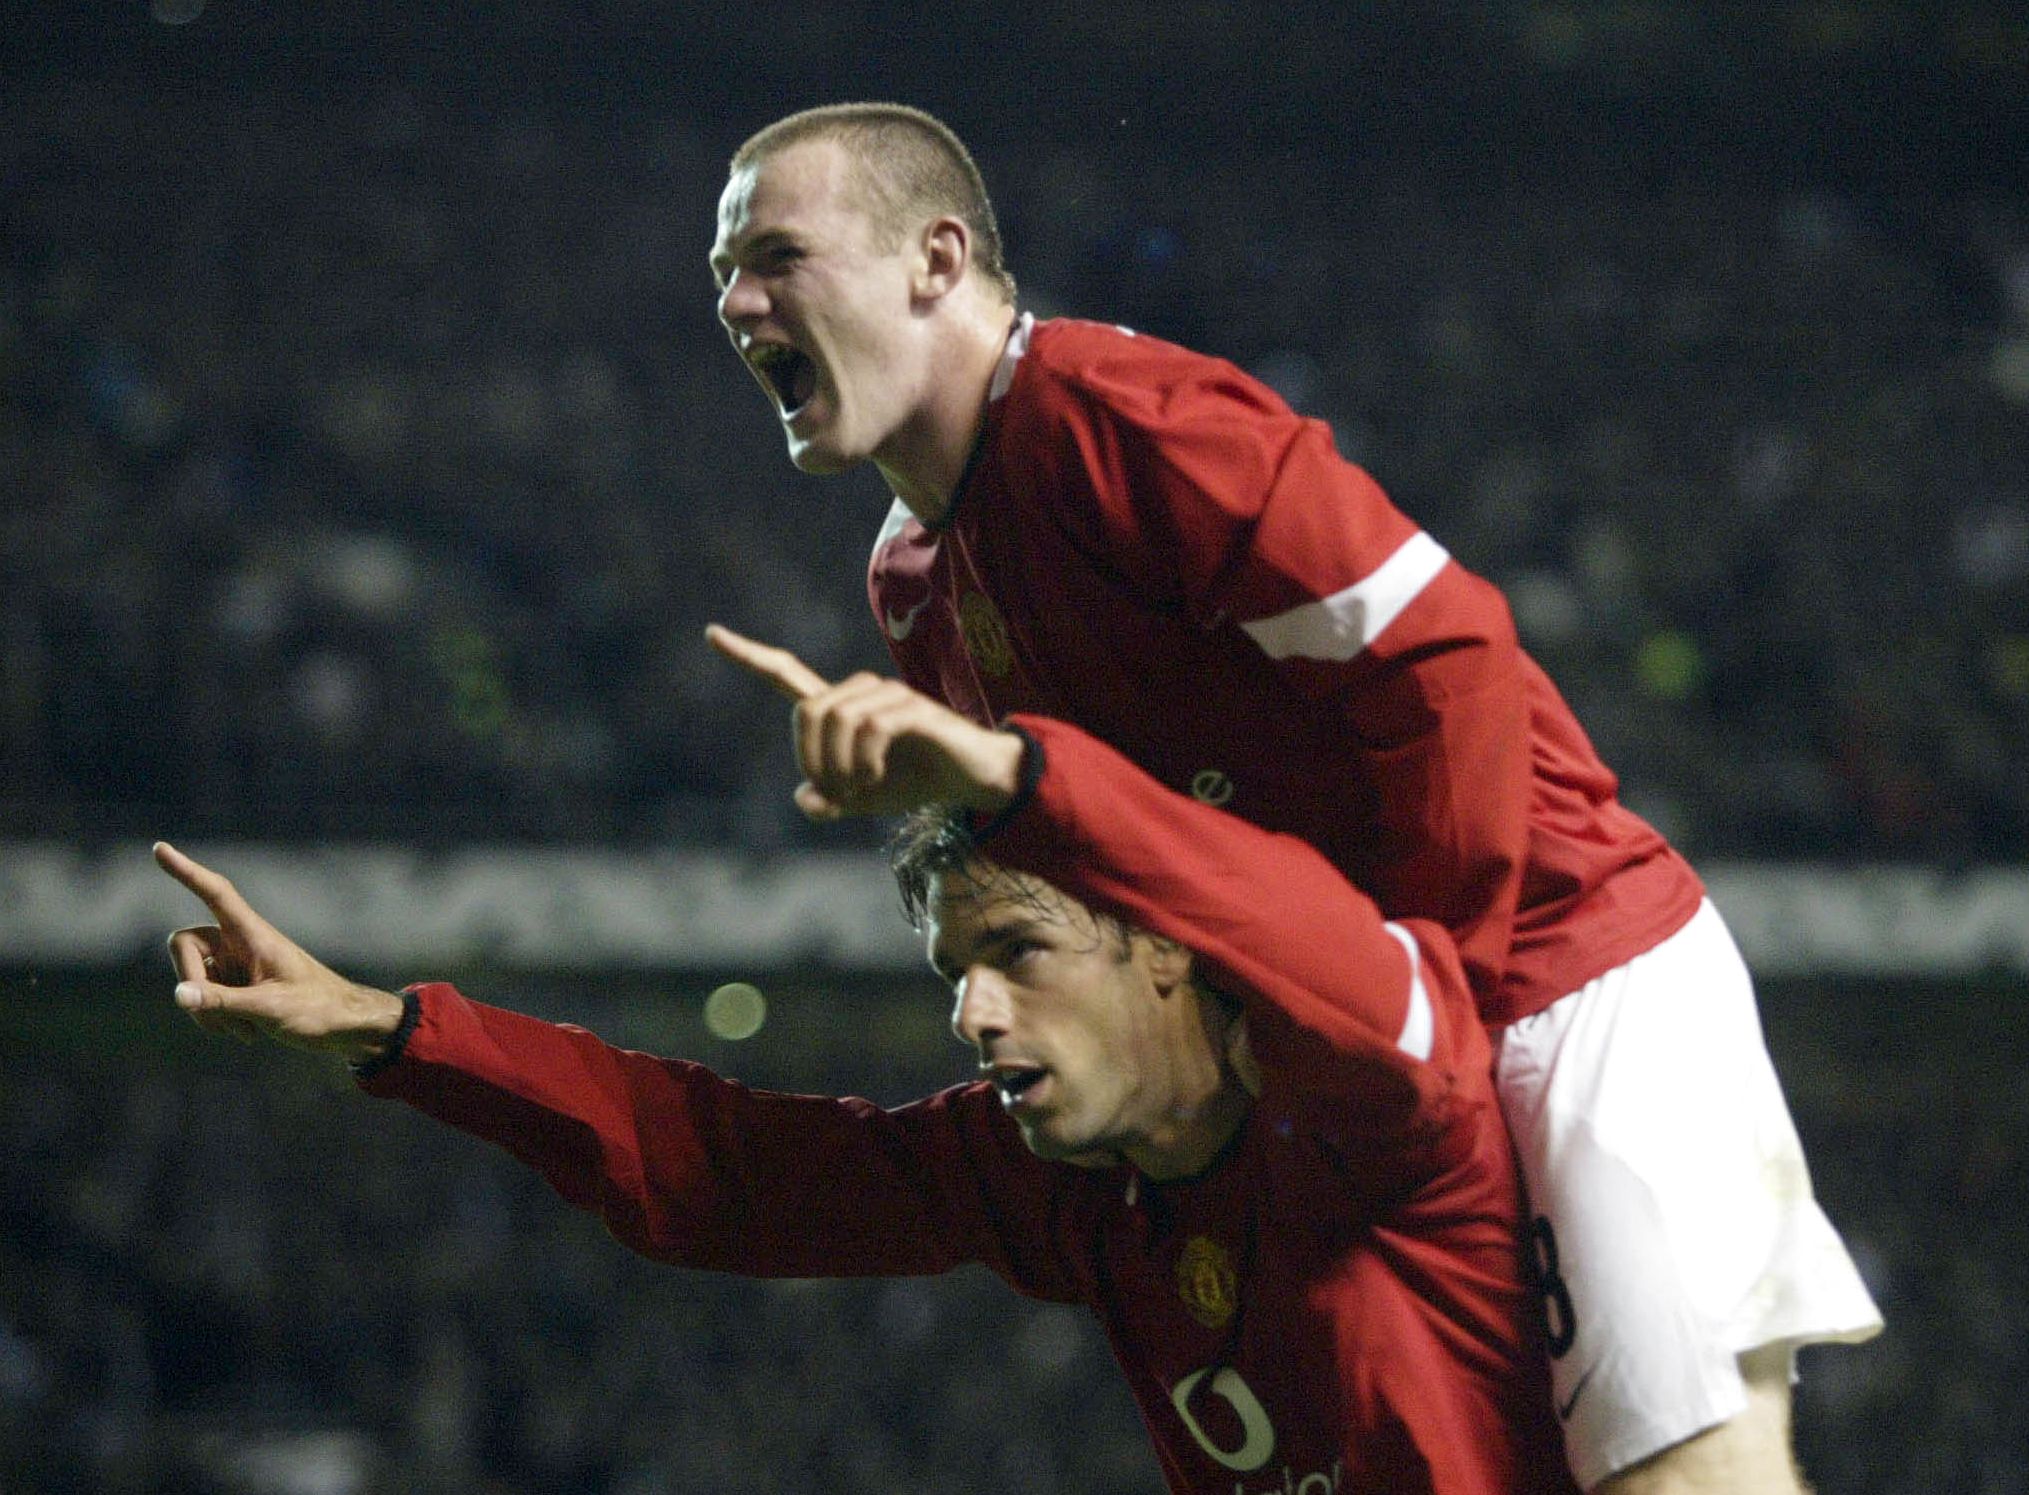 Champions League Group D match at Old Trafford.
Manchester United 6 v Fenerbahce 2.
Ruud Van Nistelrooy celebrates after scoring the fifth goal joined by teammate Wayne Rooney.
28th September 2004.